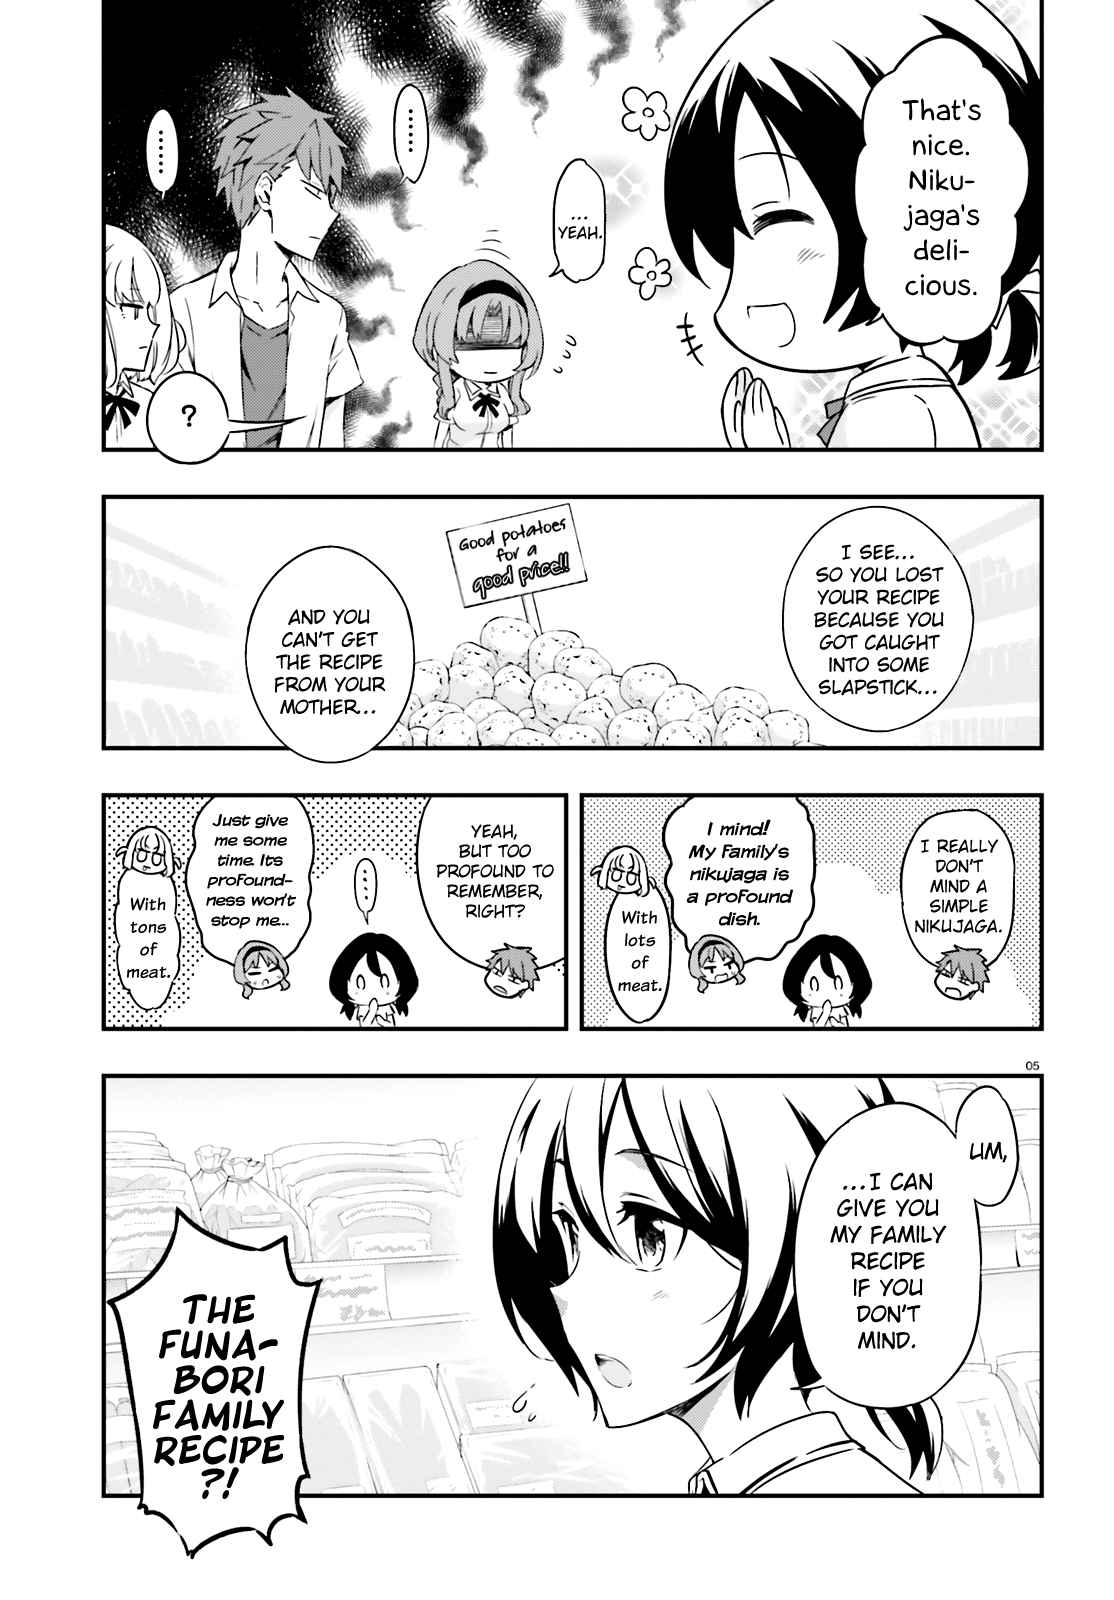 D Frag! Ch. 105 With Lots of Meat